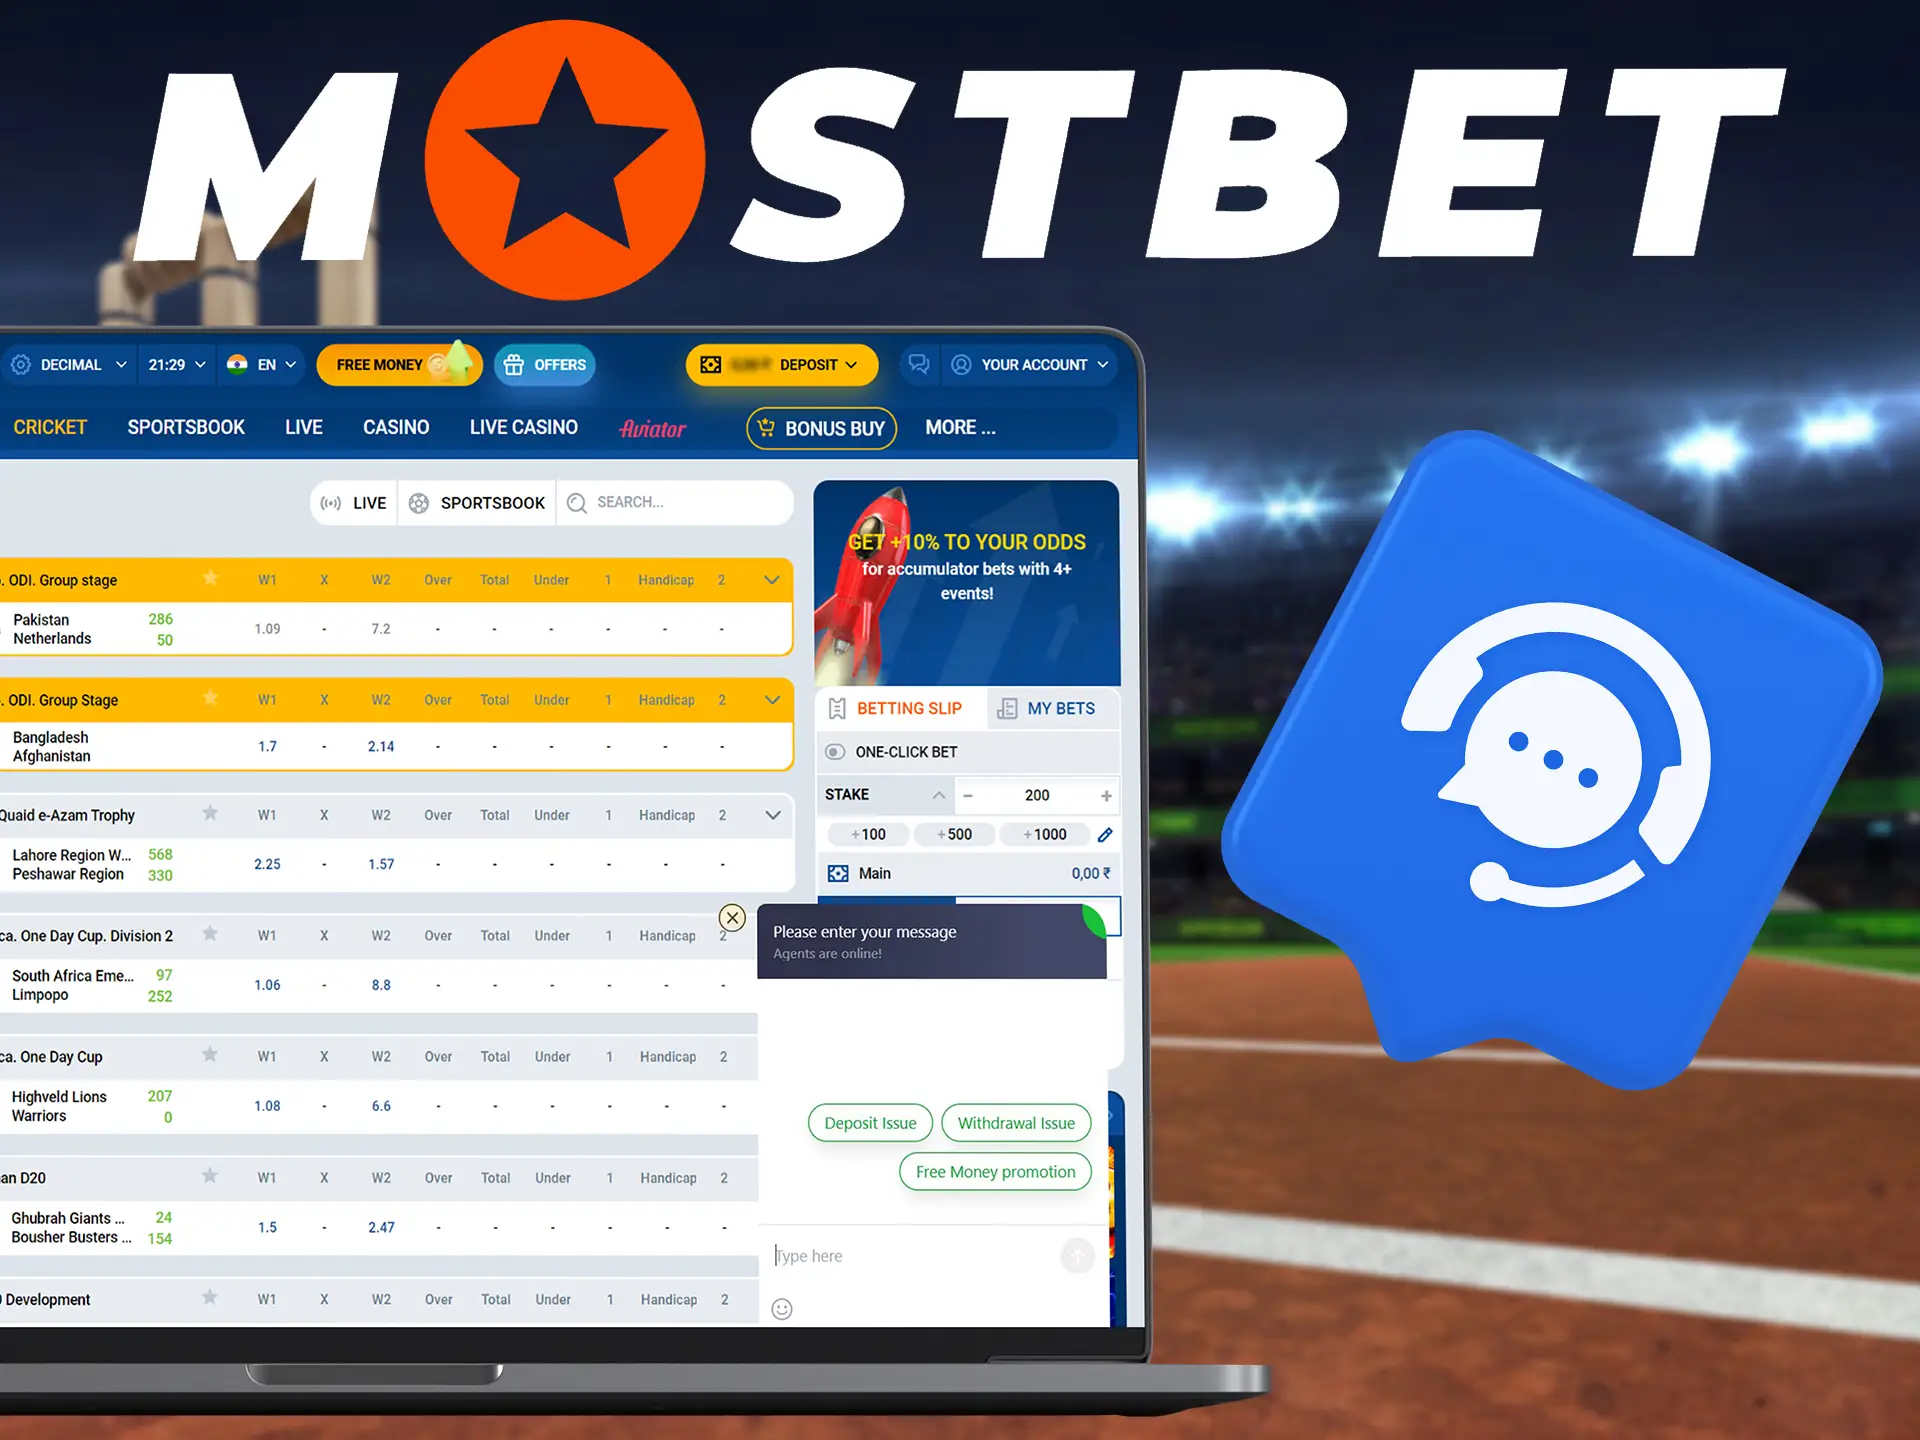 Mostbet offers players 24/7 support.